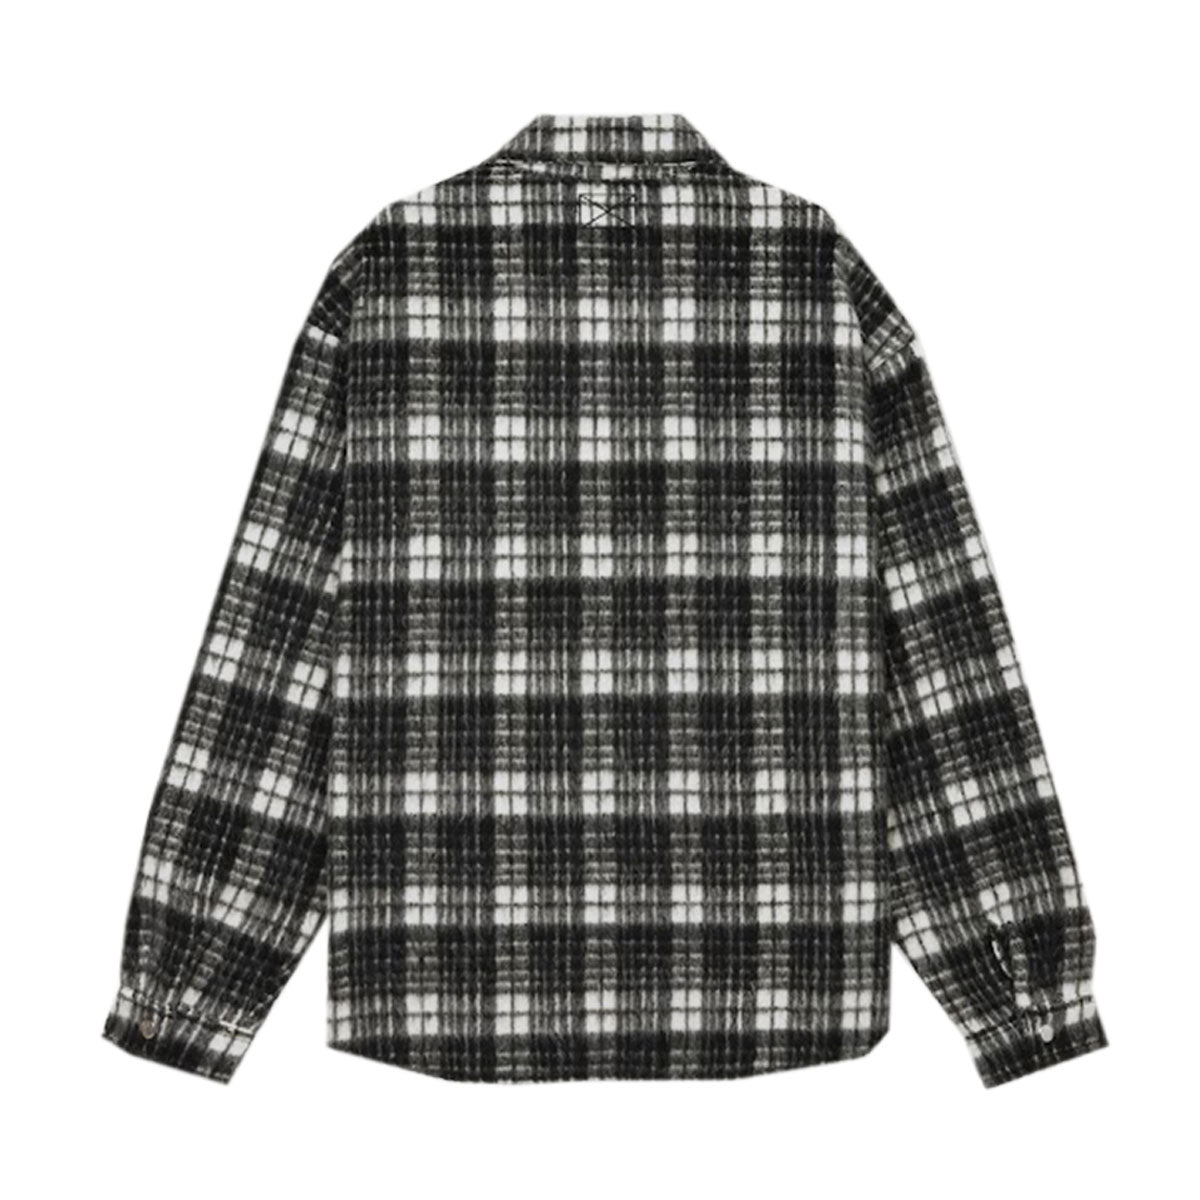 OVERSIZED CHECK JACKET | Why are you here?